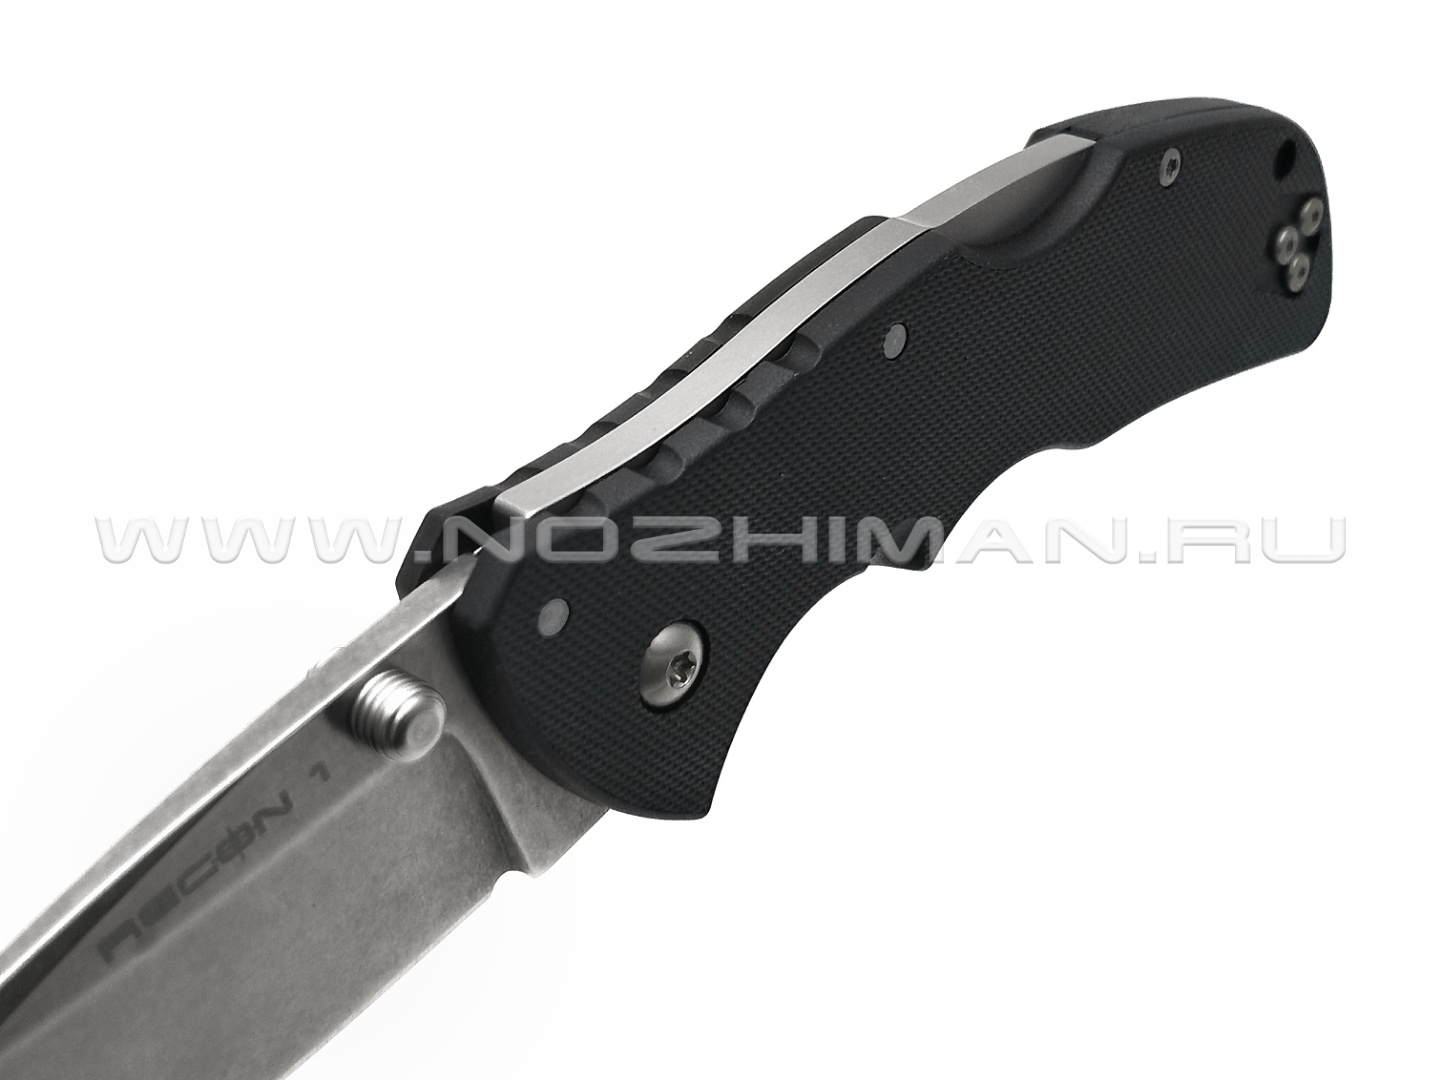 Cold Steel нож Mini Recon 1 Spear Point 27BAS сталь Aus 10A, рукоять GRN